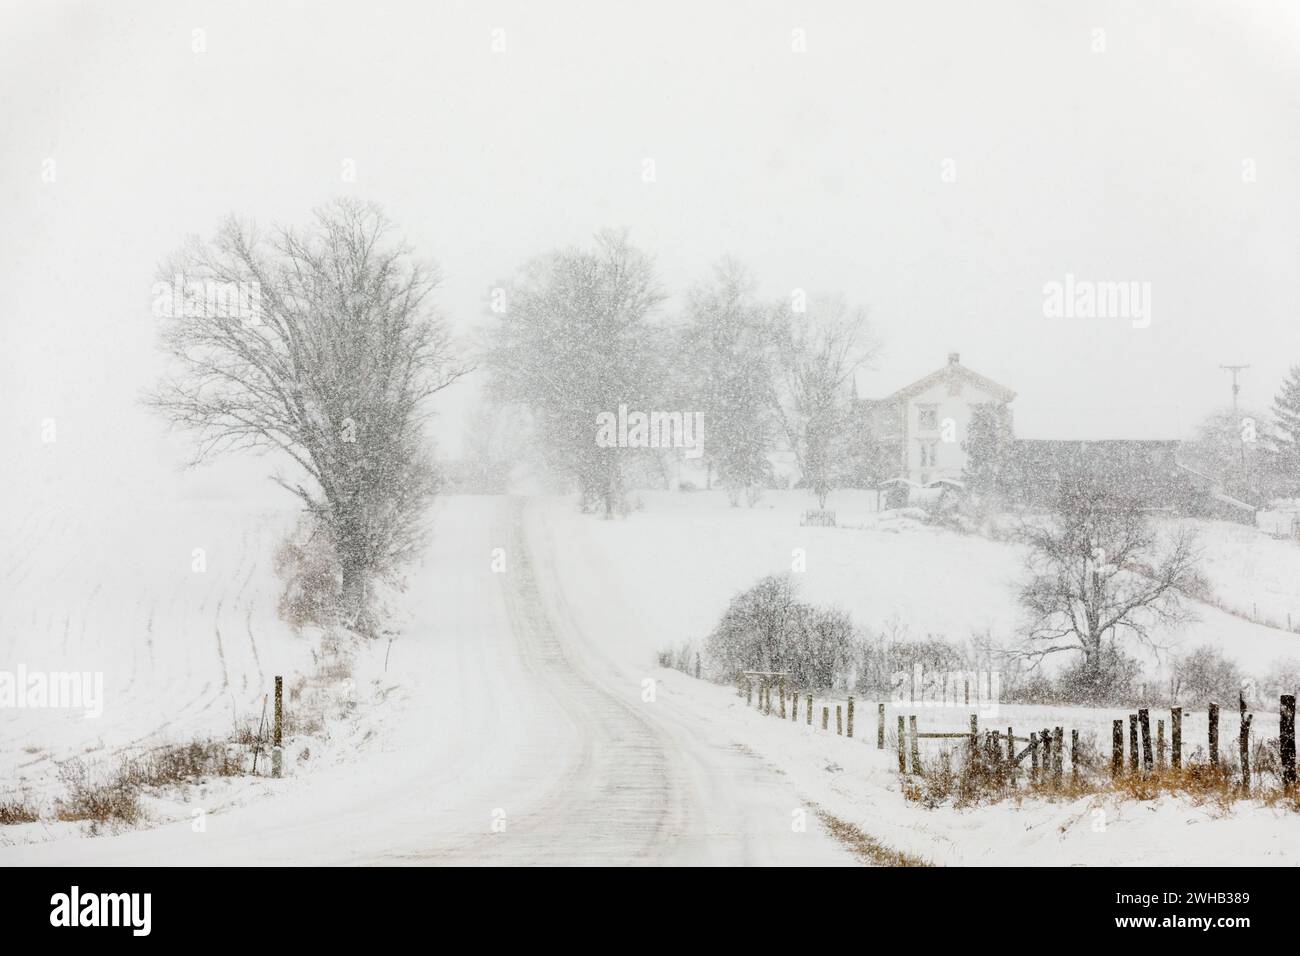 Snowing in January, in rural farm country, Mohawk Valley, New York State, USA. Stock Photo